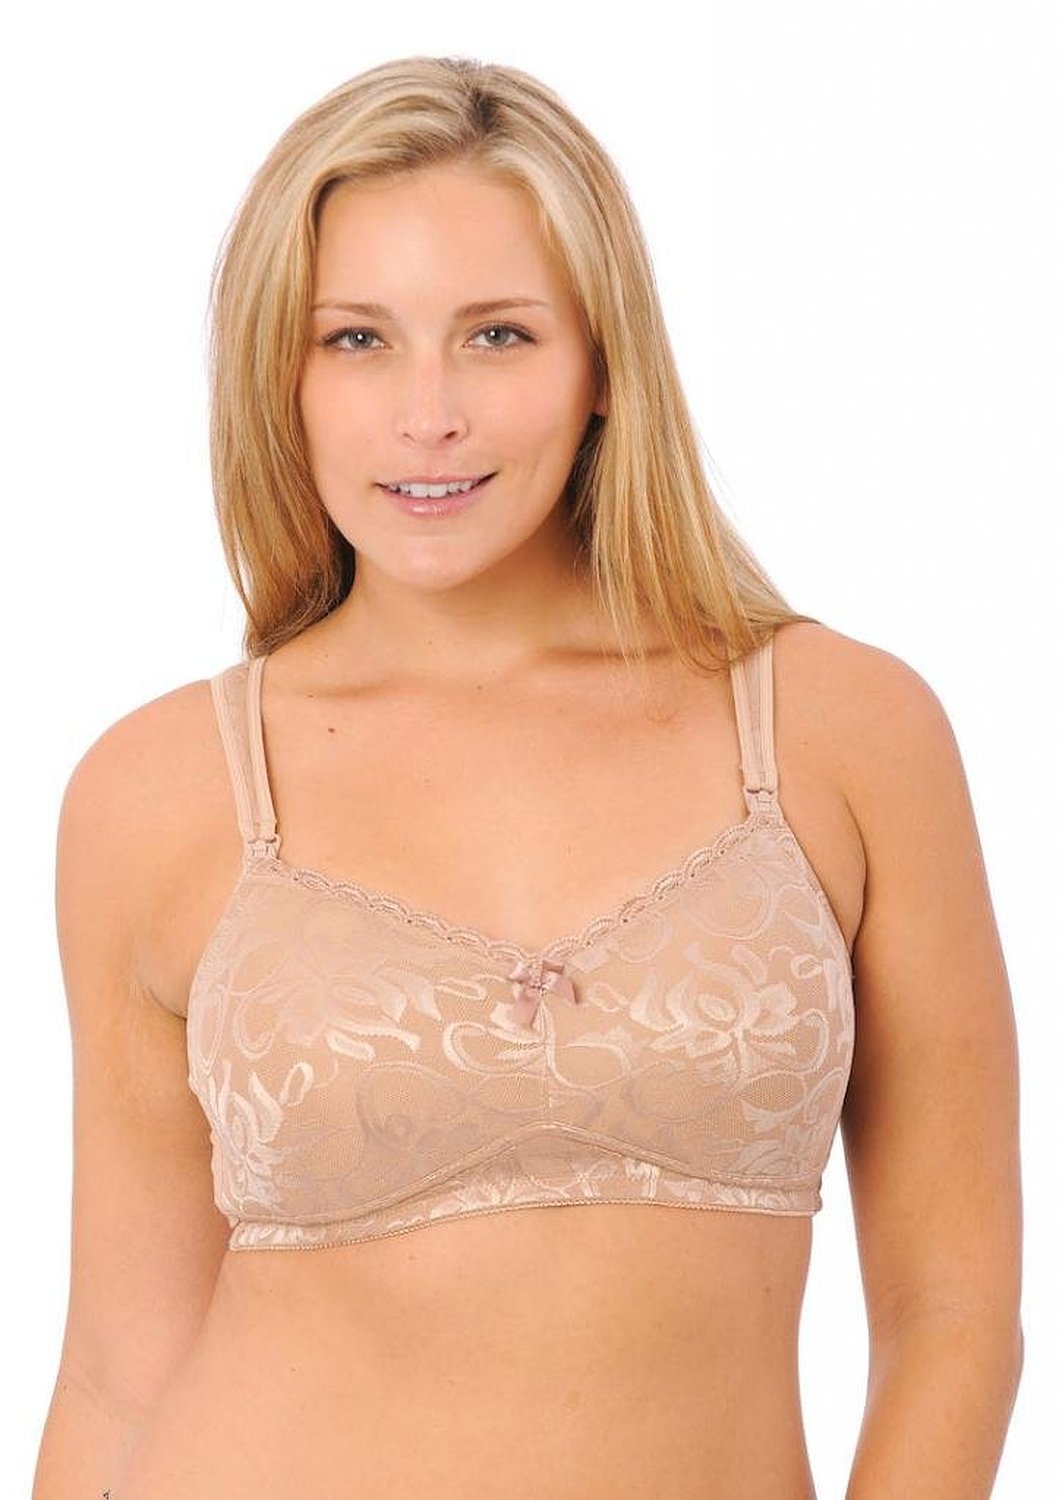 LLLI Hands-Free Pumping and Nursing Bra with a Molded Cup